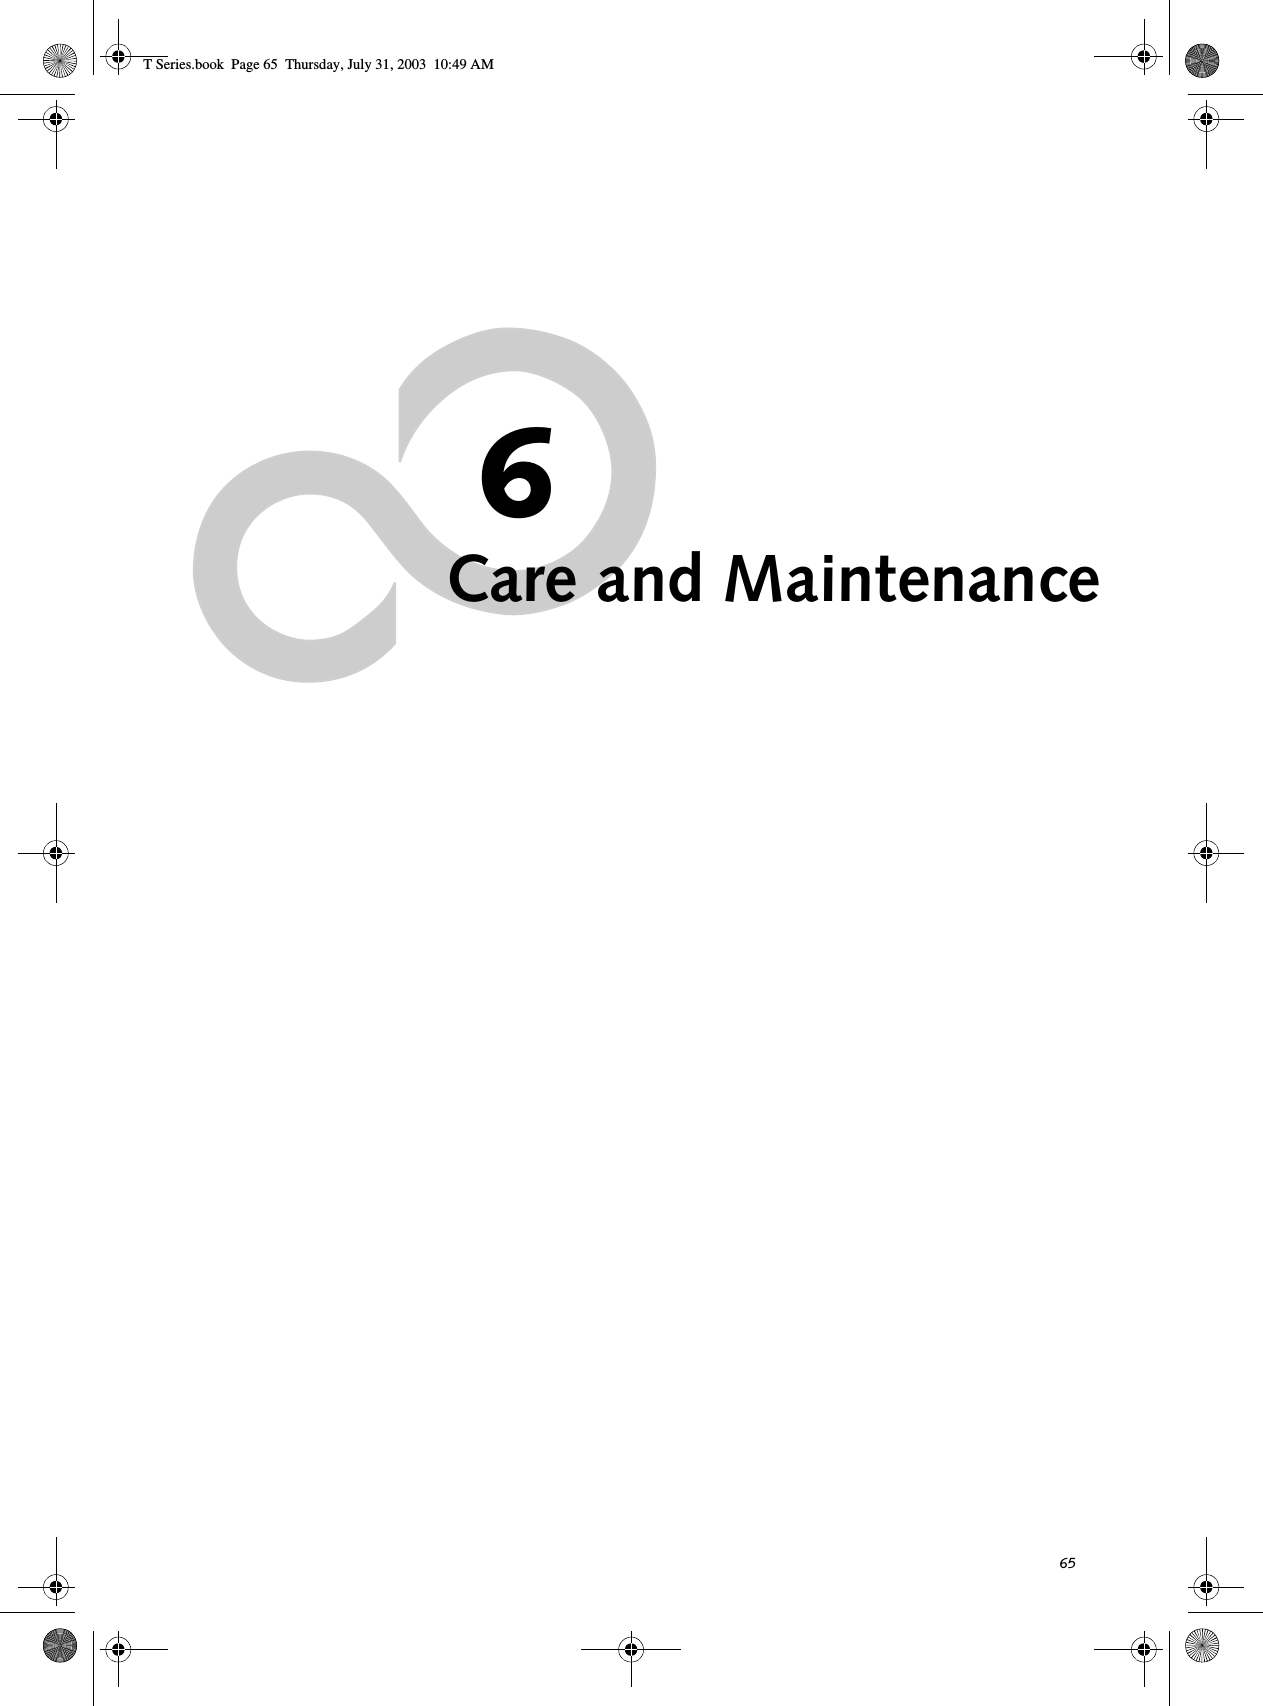 656Care and MaintenanceT Series.book  Page 65  Thursday, July 31, 2003  10:49 AM